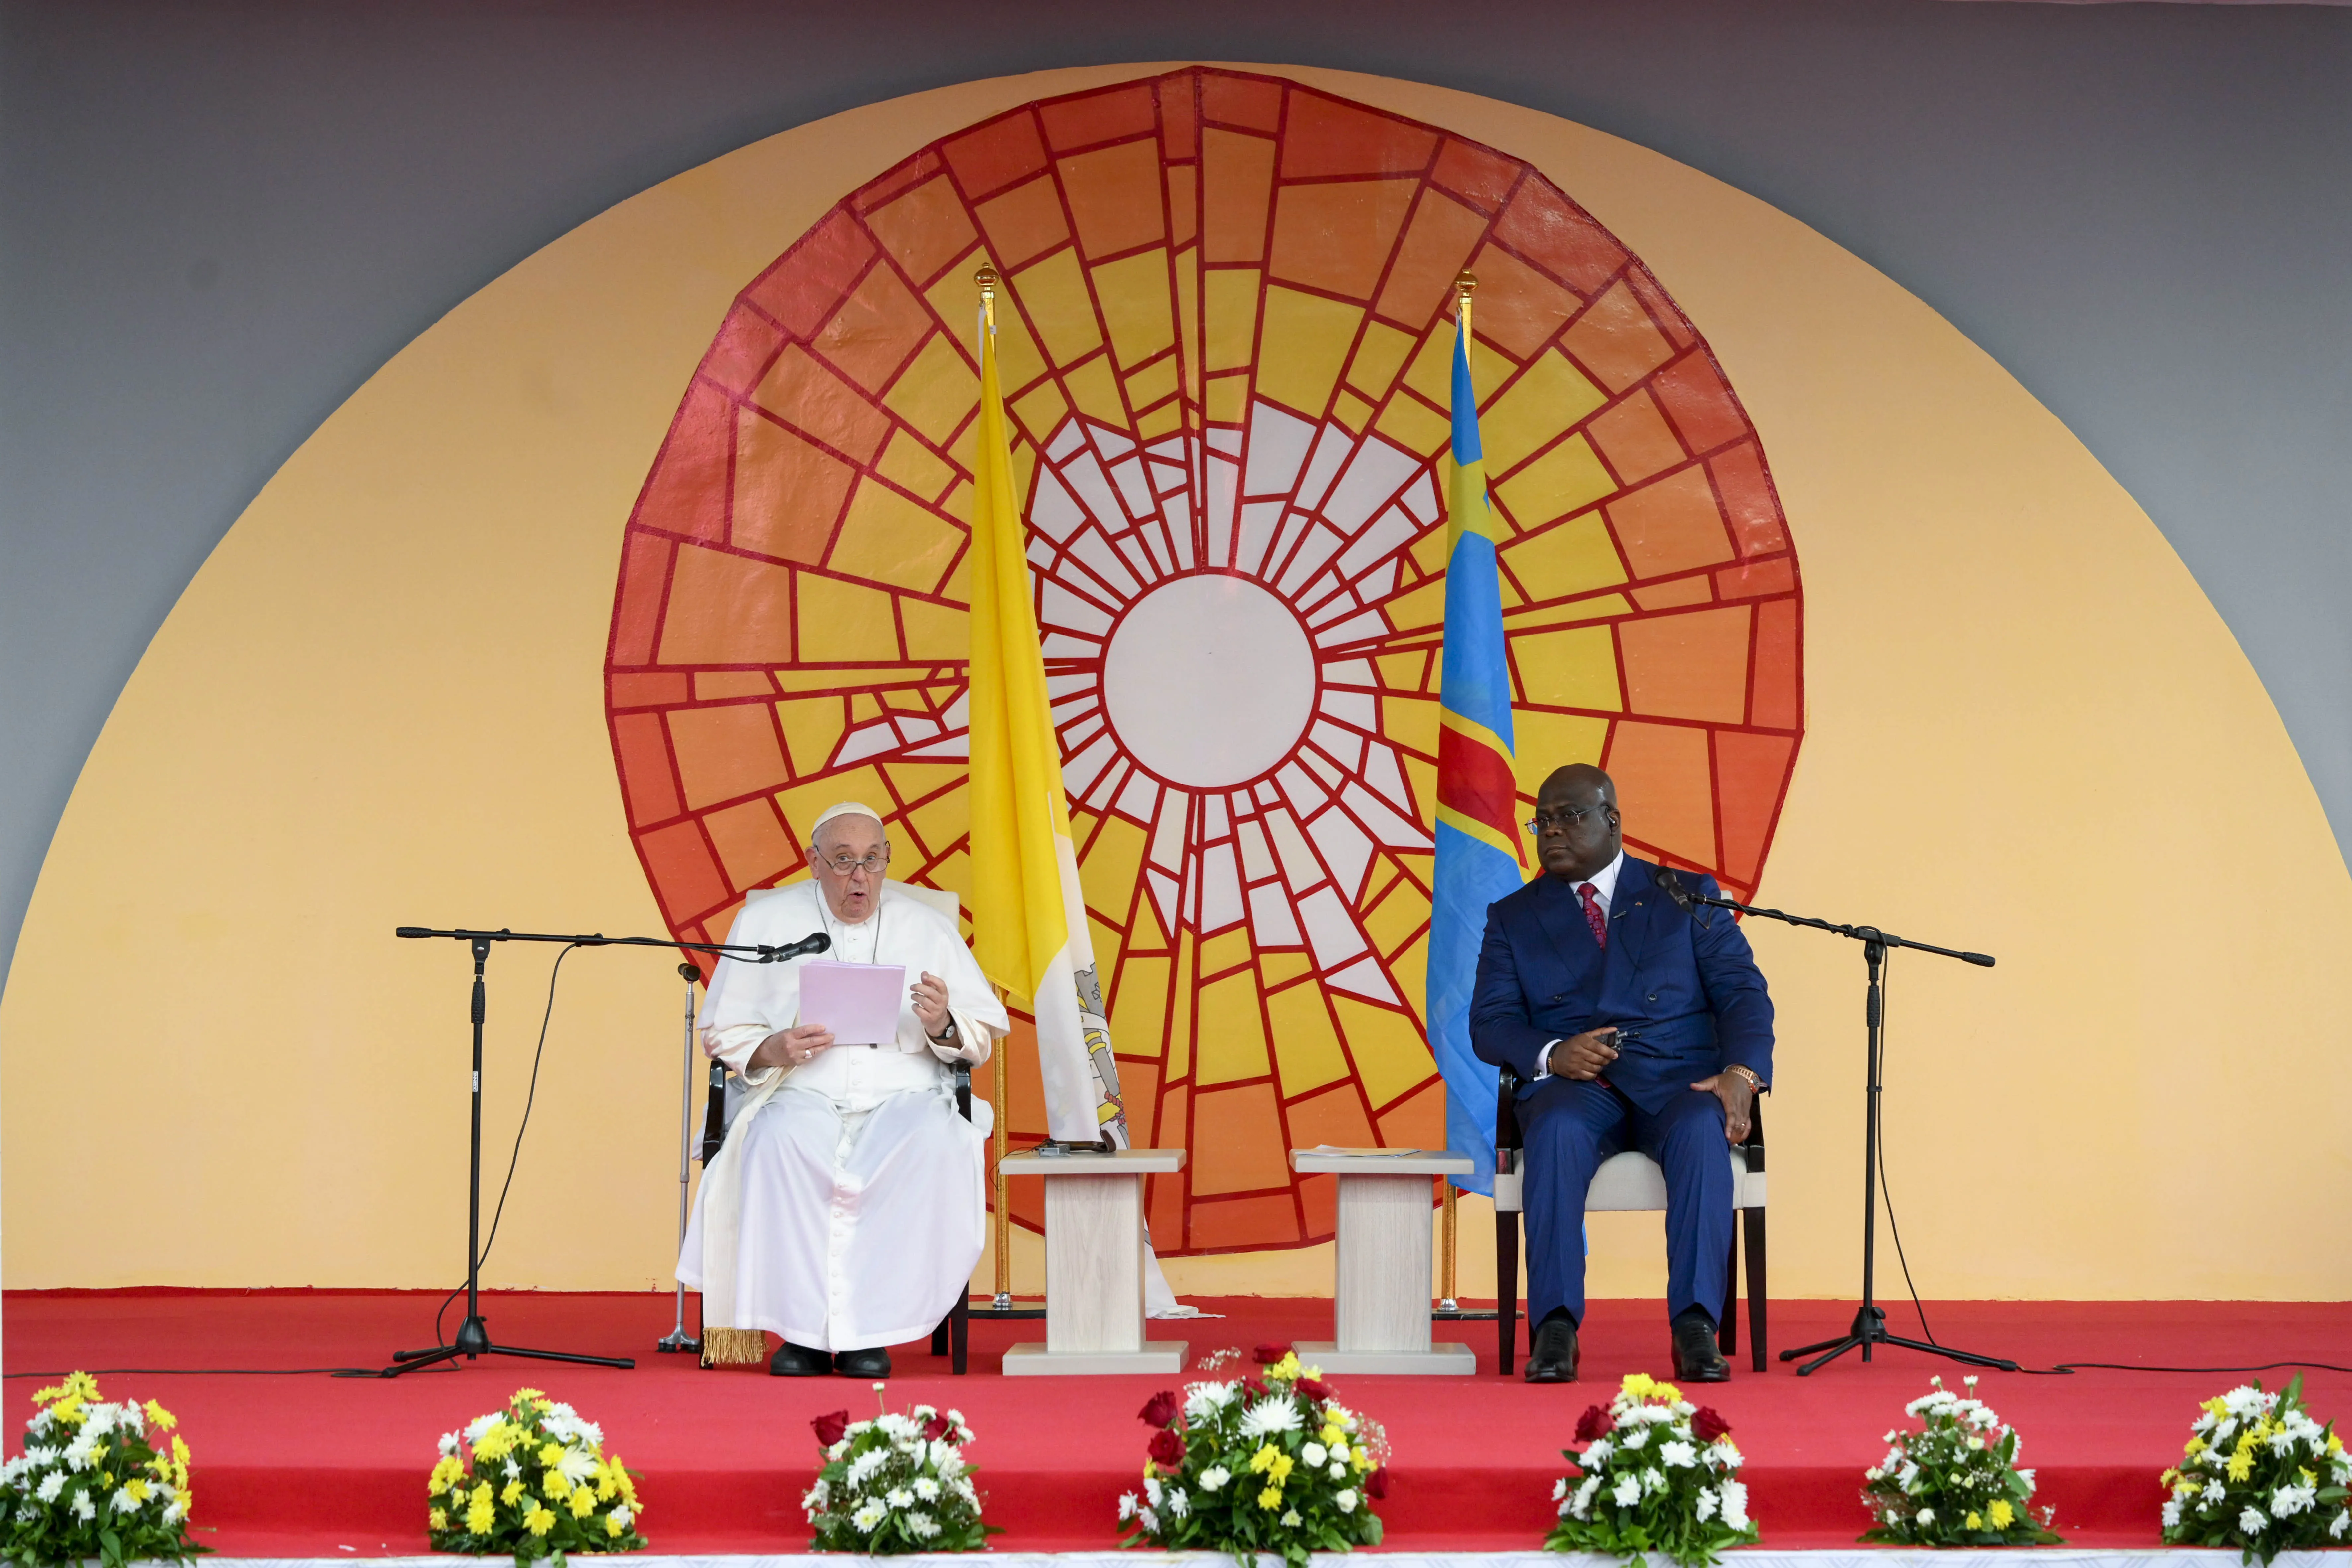 Pope Francis speaks at an audience with the Democratic Republic of Congo's authorities, diplomats, and representatives of civil society in the  on Jan. 31, 2023, on the first leg of a six-day trip that will also include South Sudan. At right is President Felix Tshisekedi of the Democratic Republic of Congo. Credit: Vatican Media